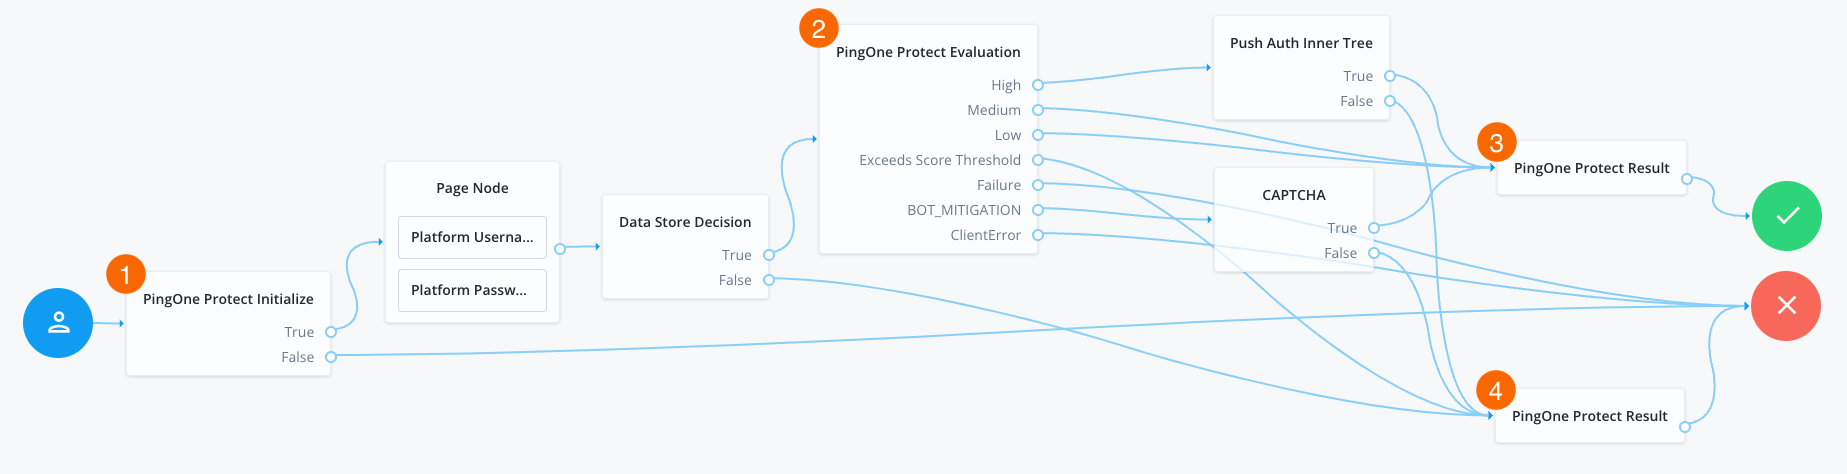 An example PingOne Protect journey